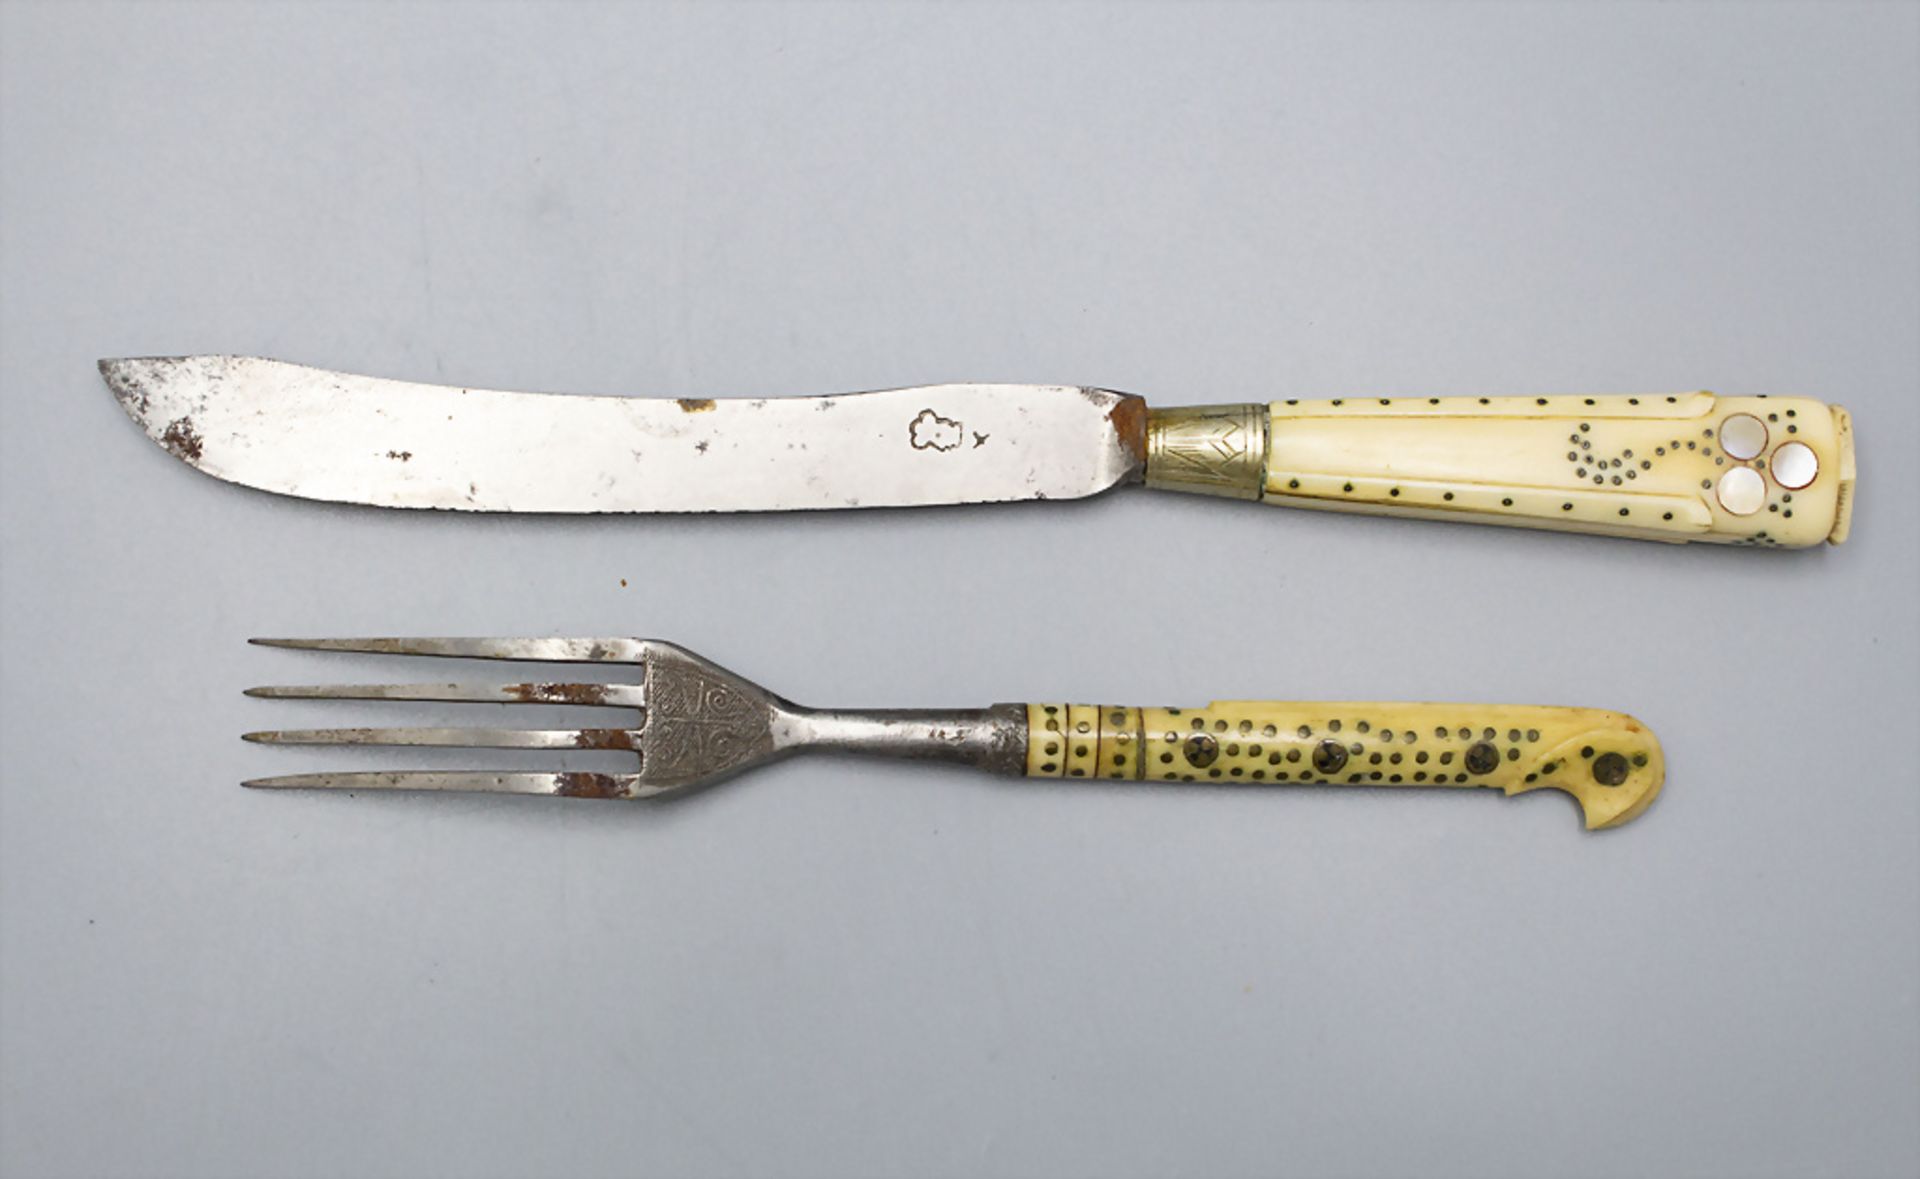 Barock Besteck / A Baroque fork and knife, 18. Jh. - Image 2 of 6